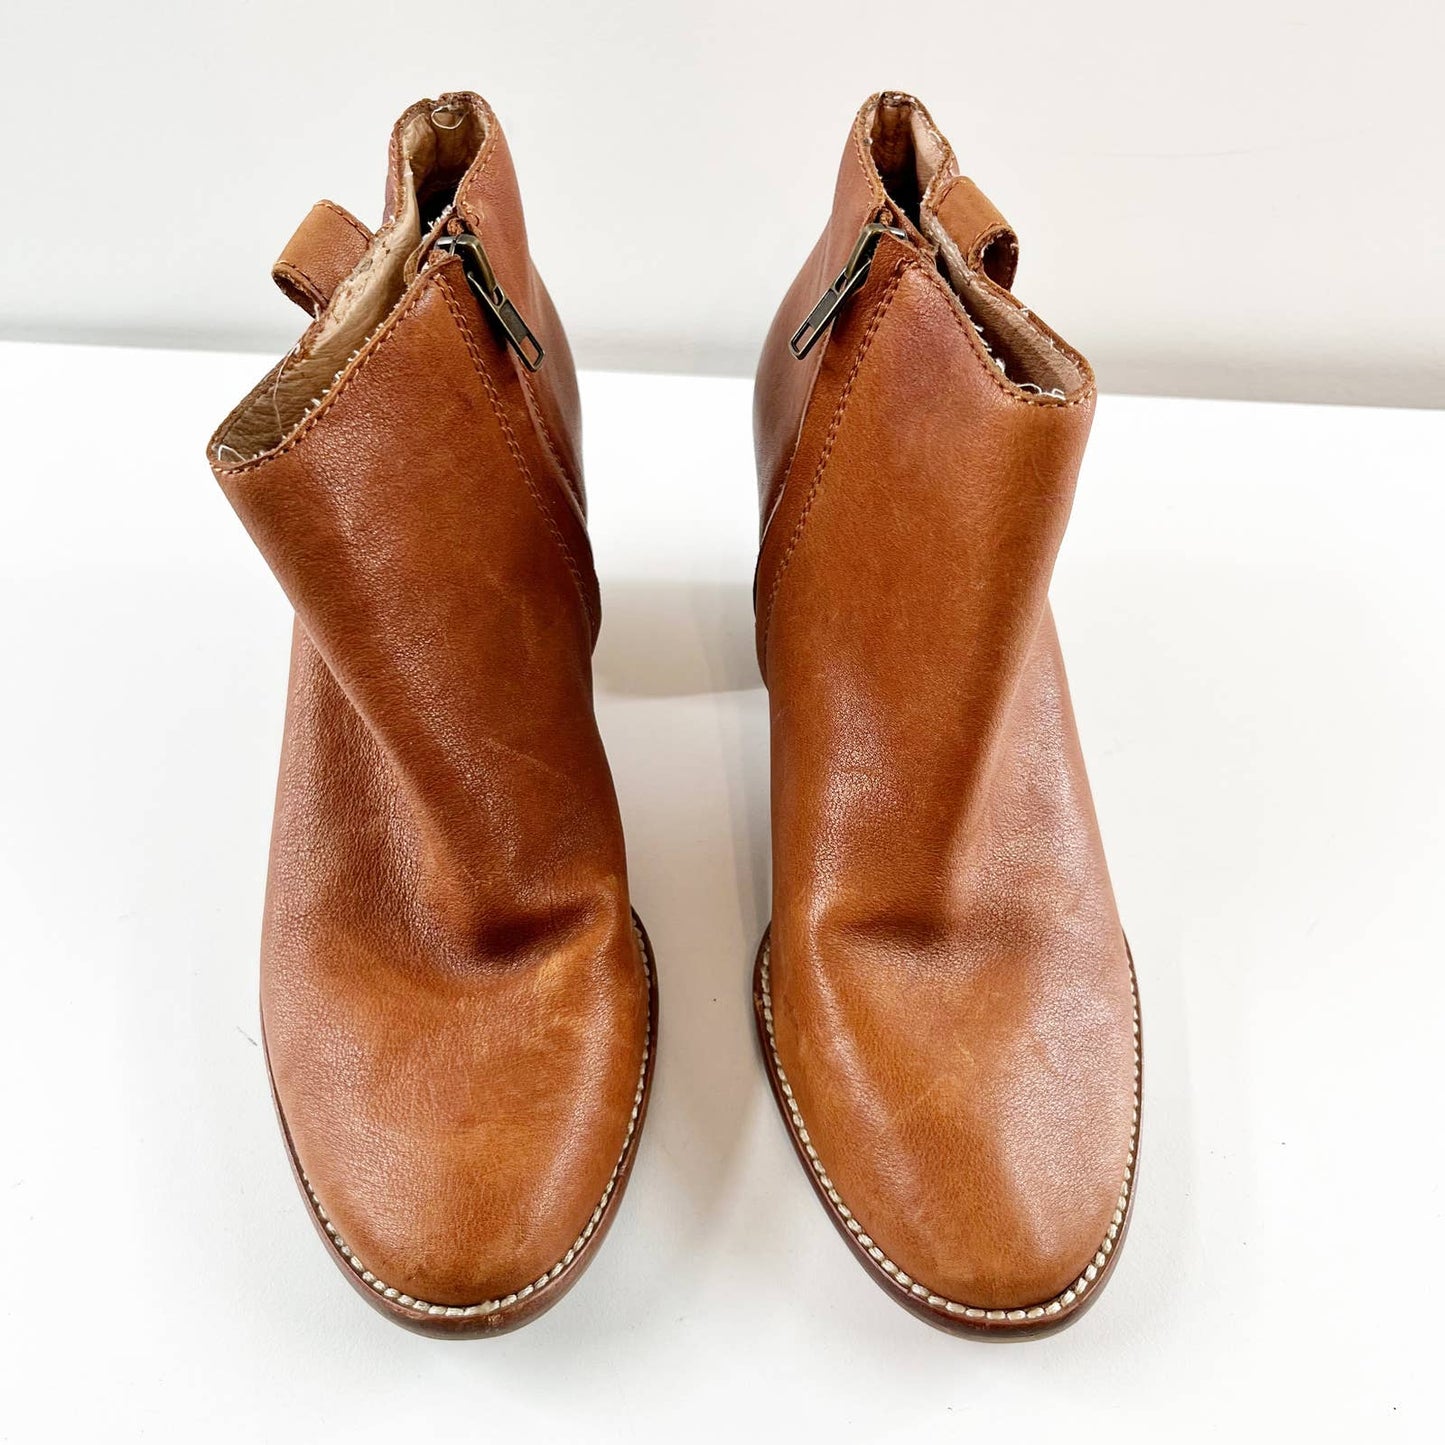 Madewell The Billie Leather Ankle Boot Booties Brown 7.5